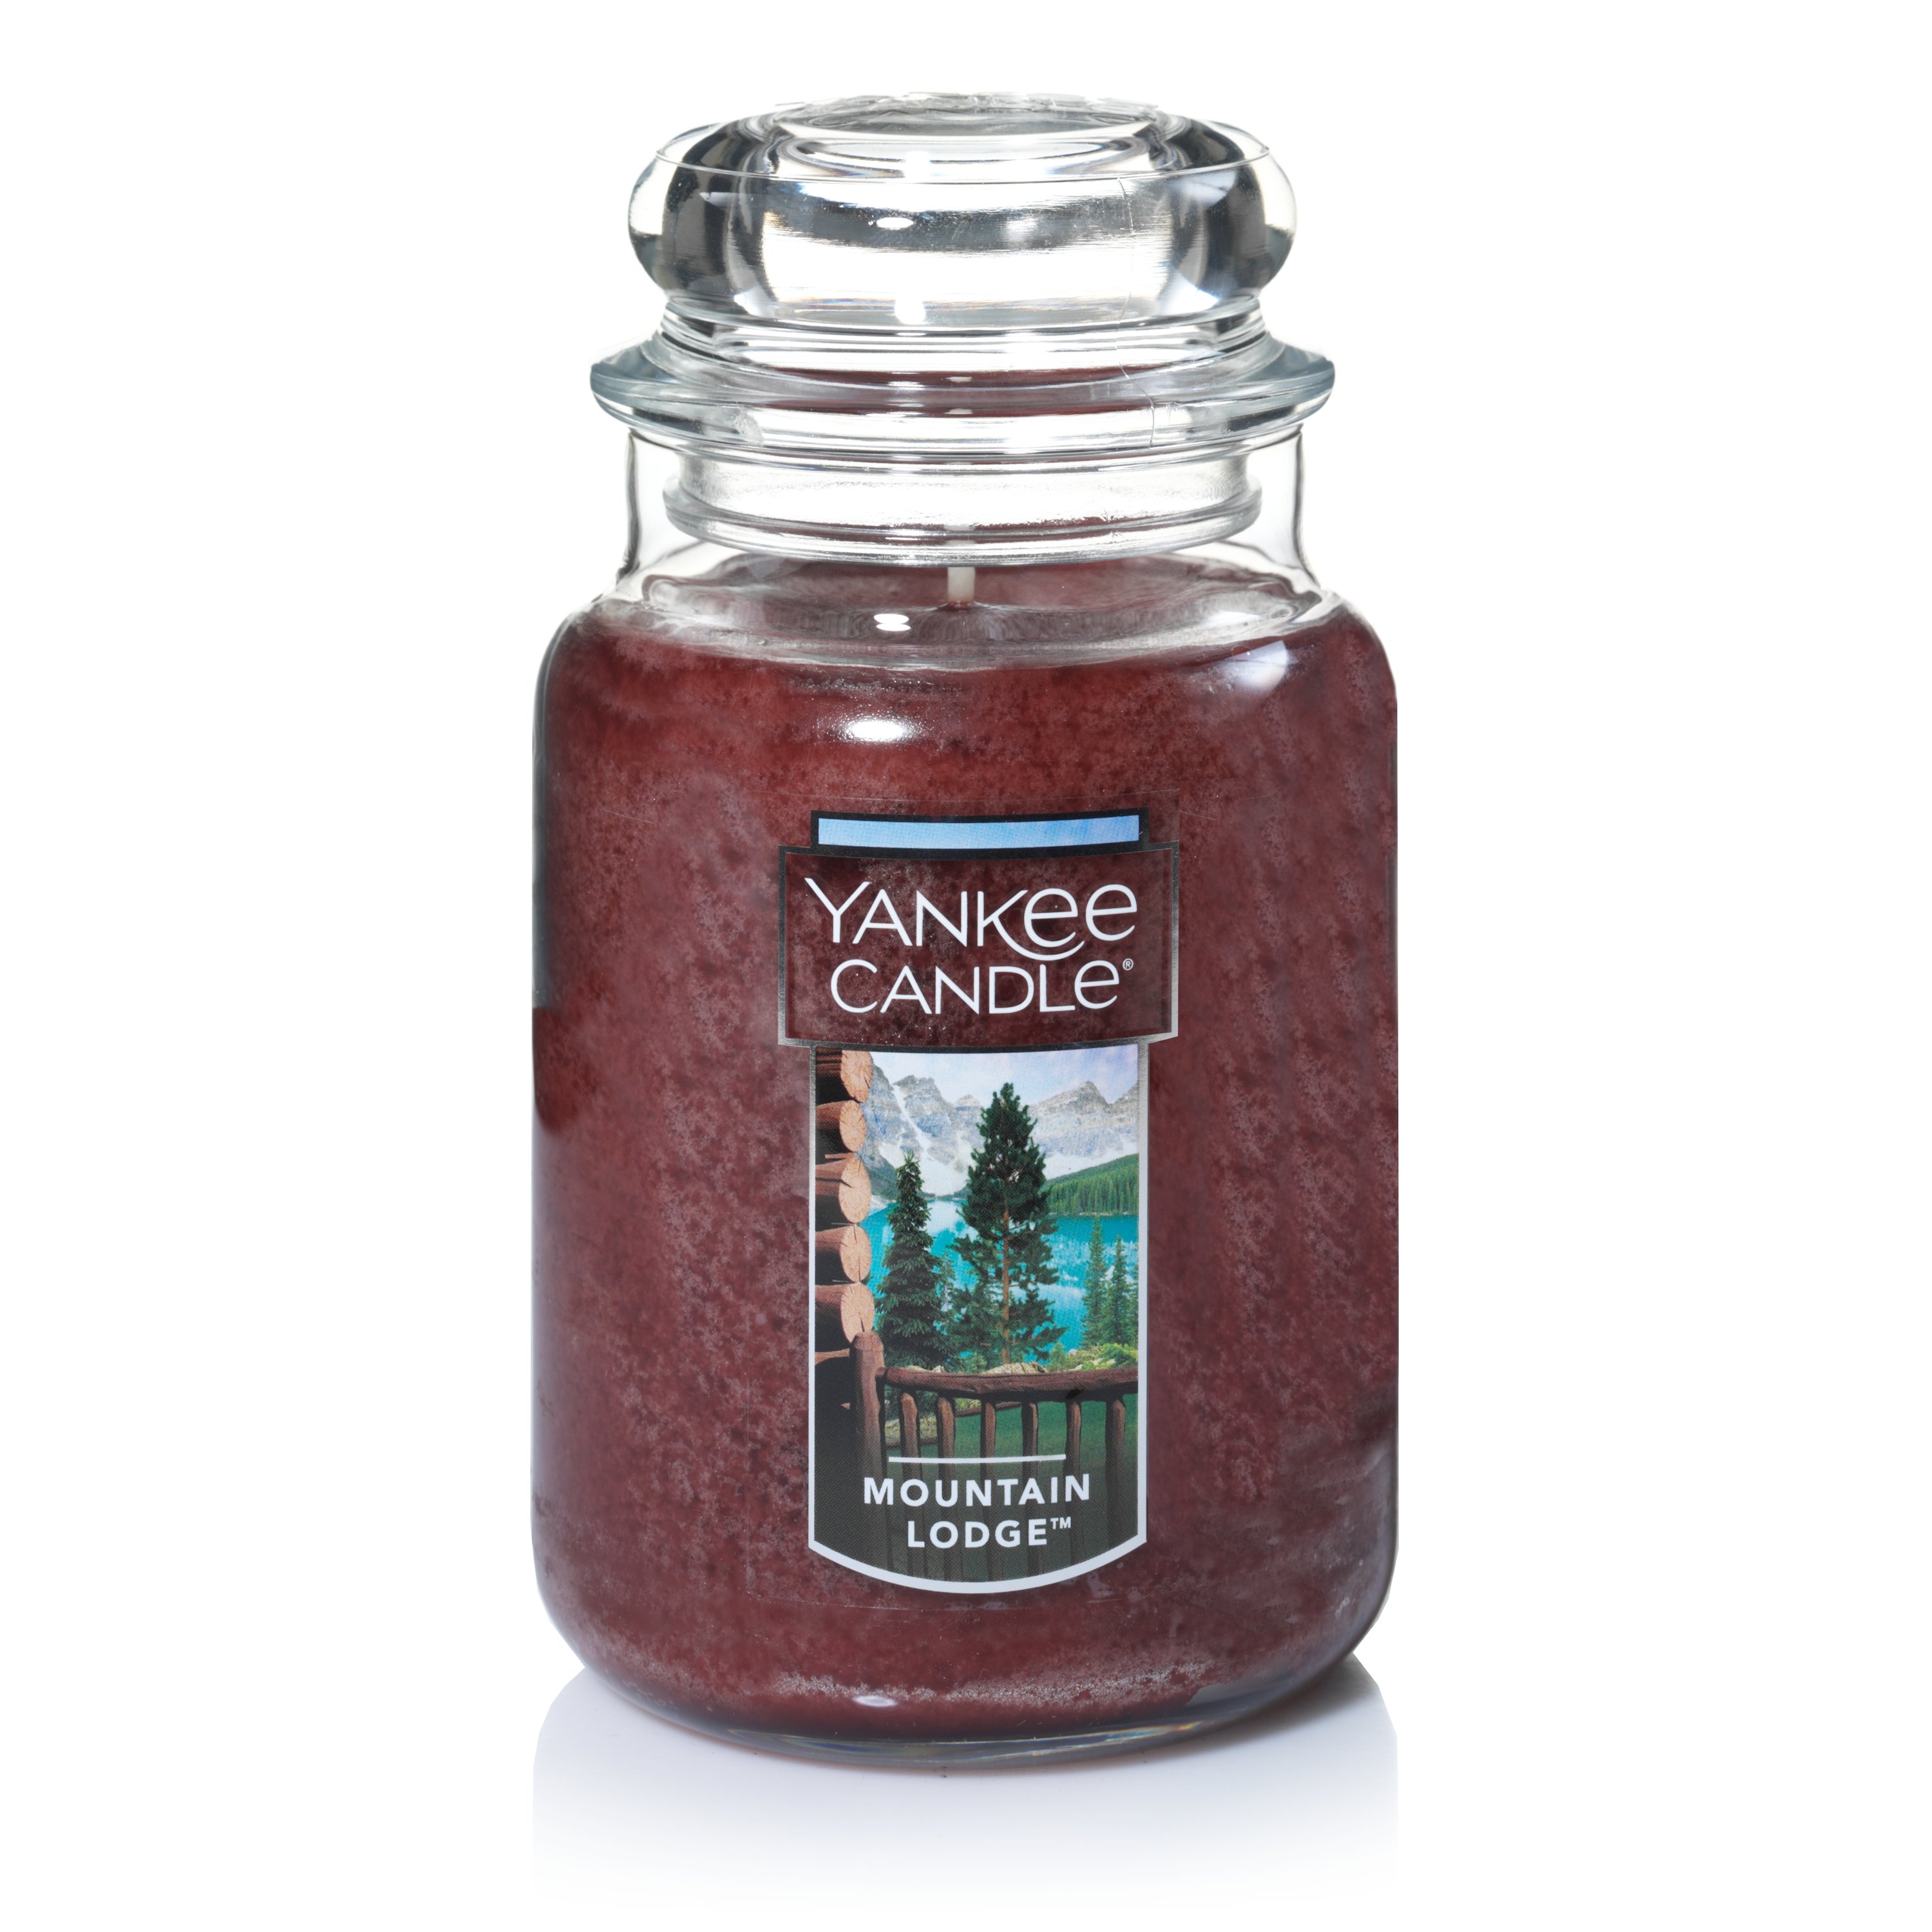 1 "NEW" Yankee Candle Over The River Classic Large Jar 22oz 